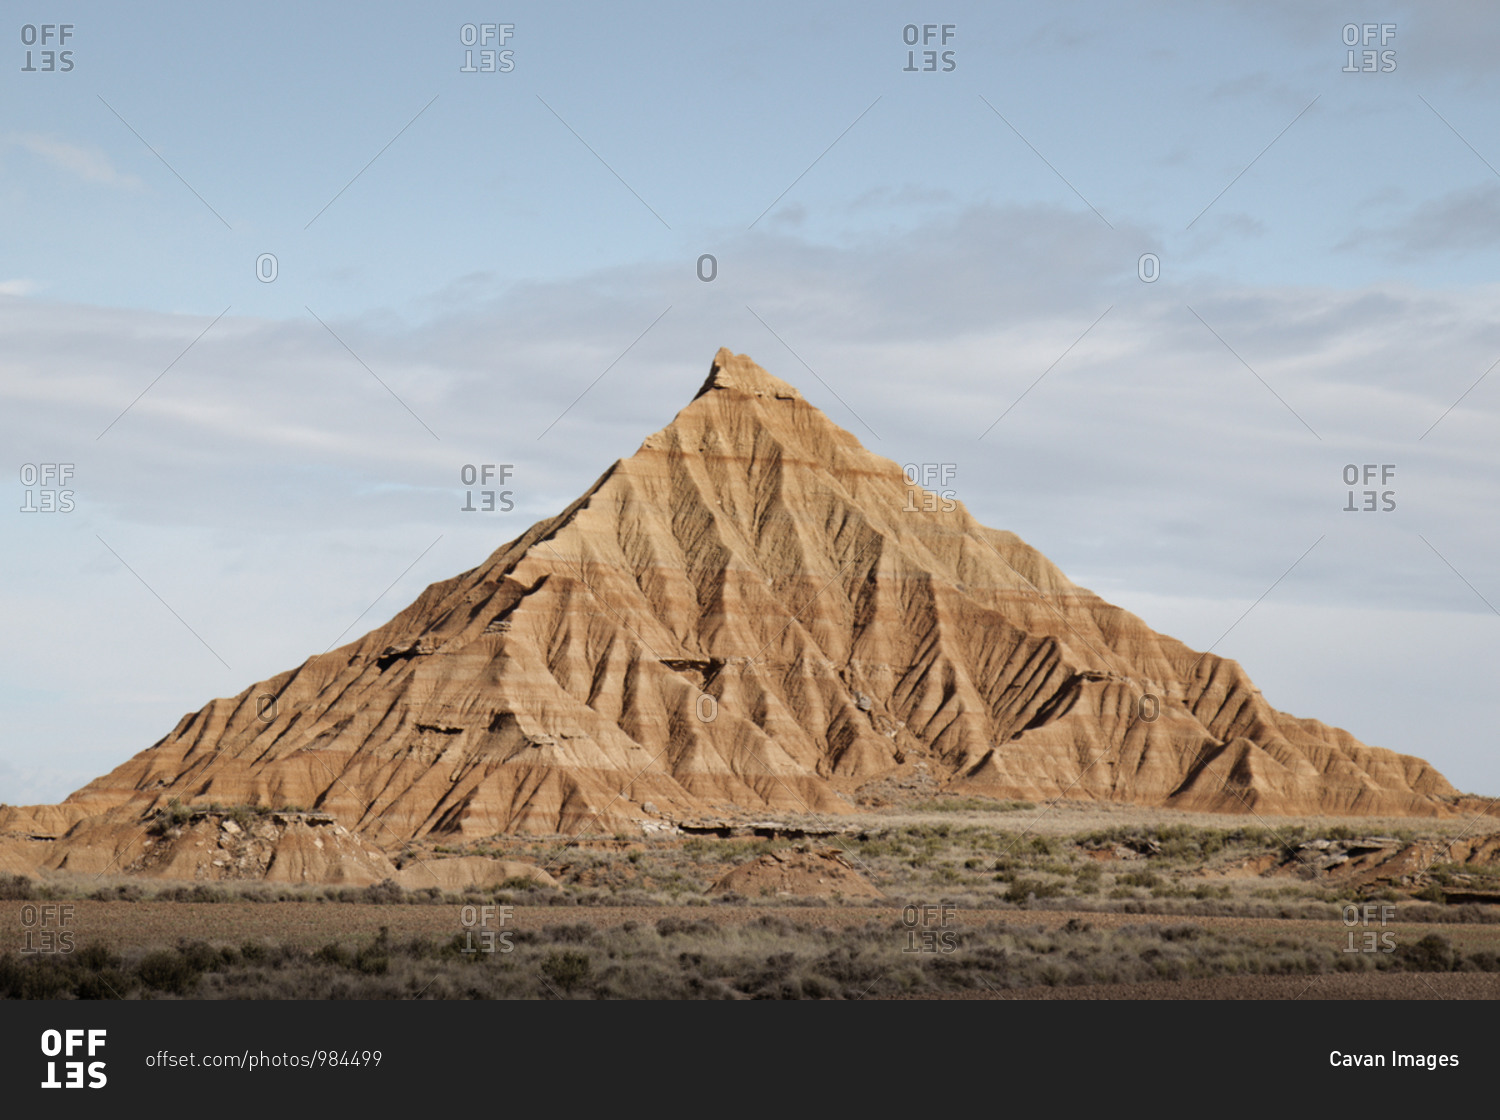 Imposing mountain of sand in the middle of the desert